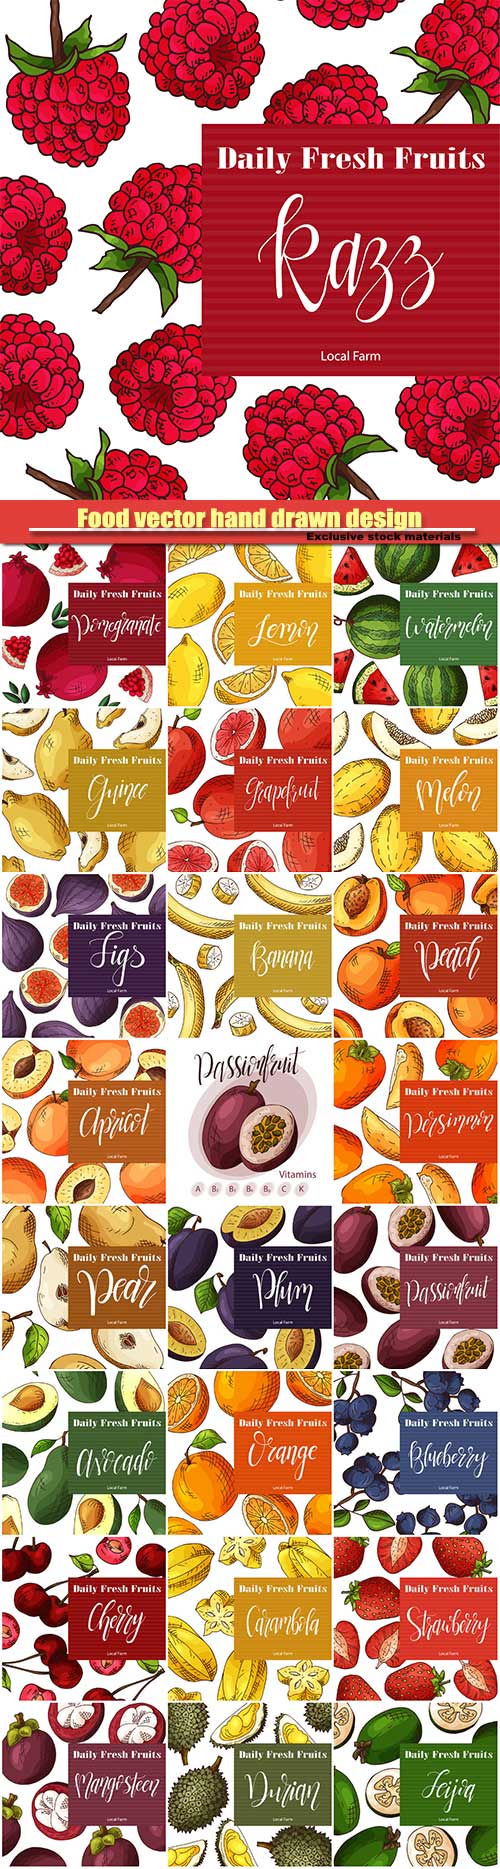 Food vector hand drawn design with fruit